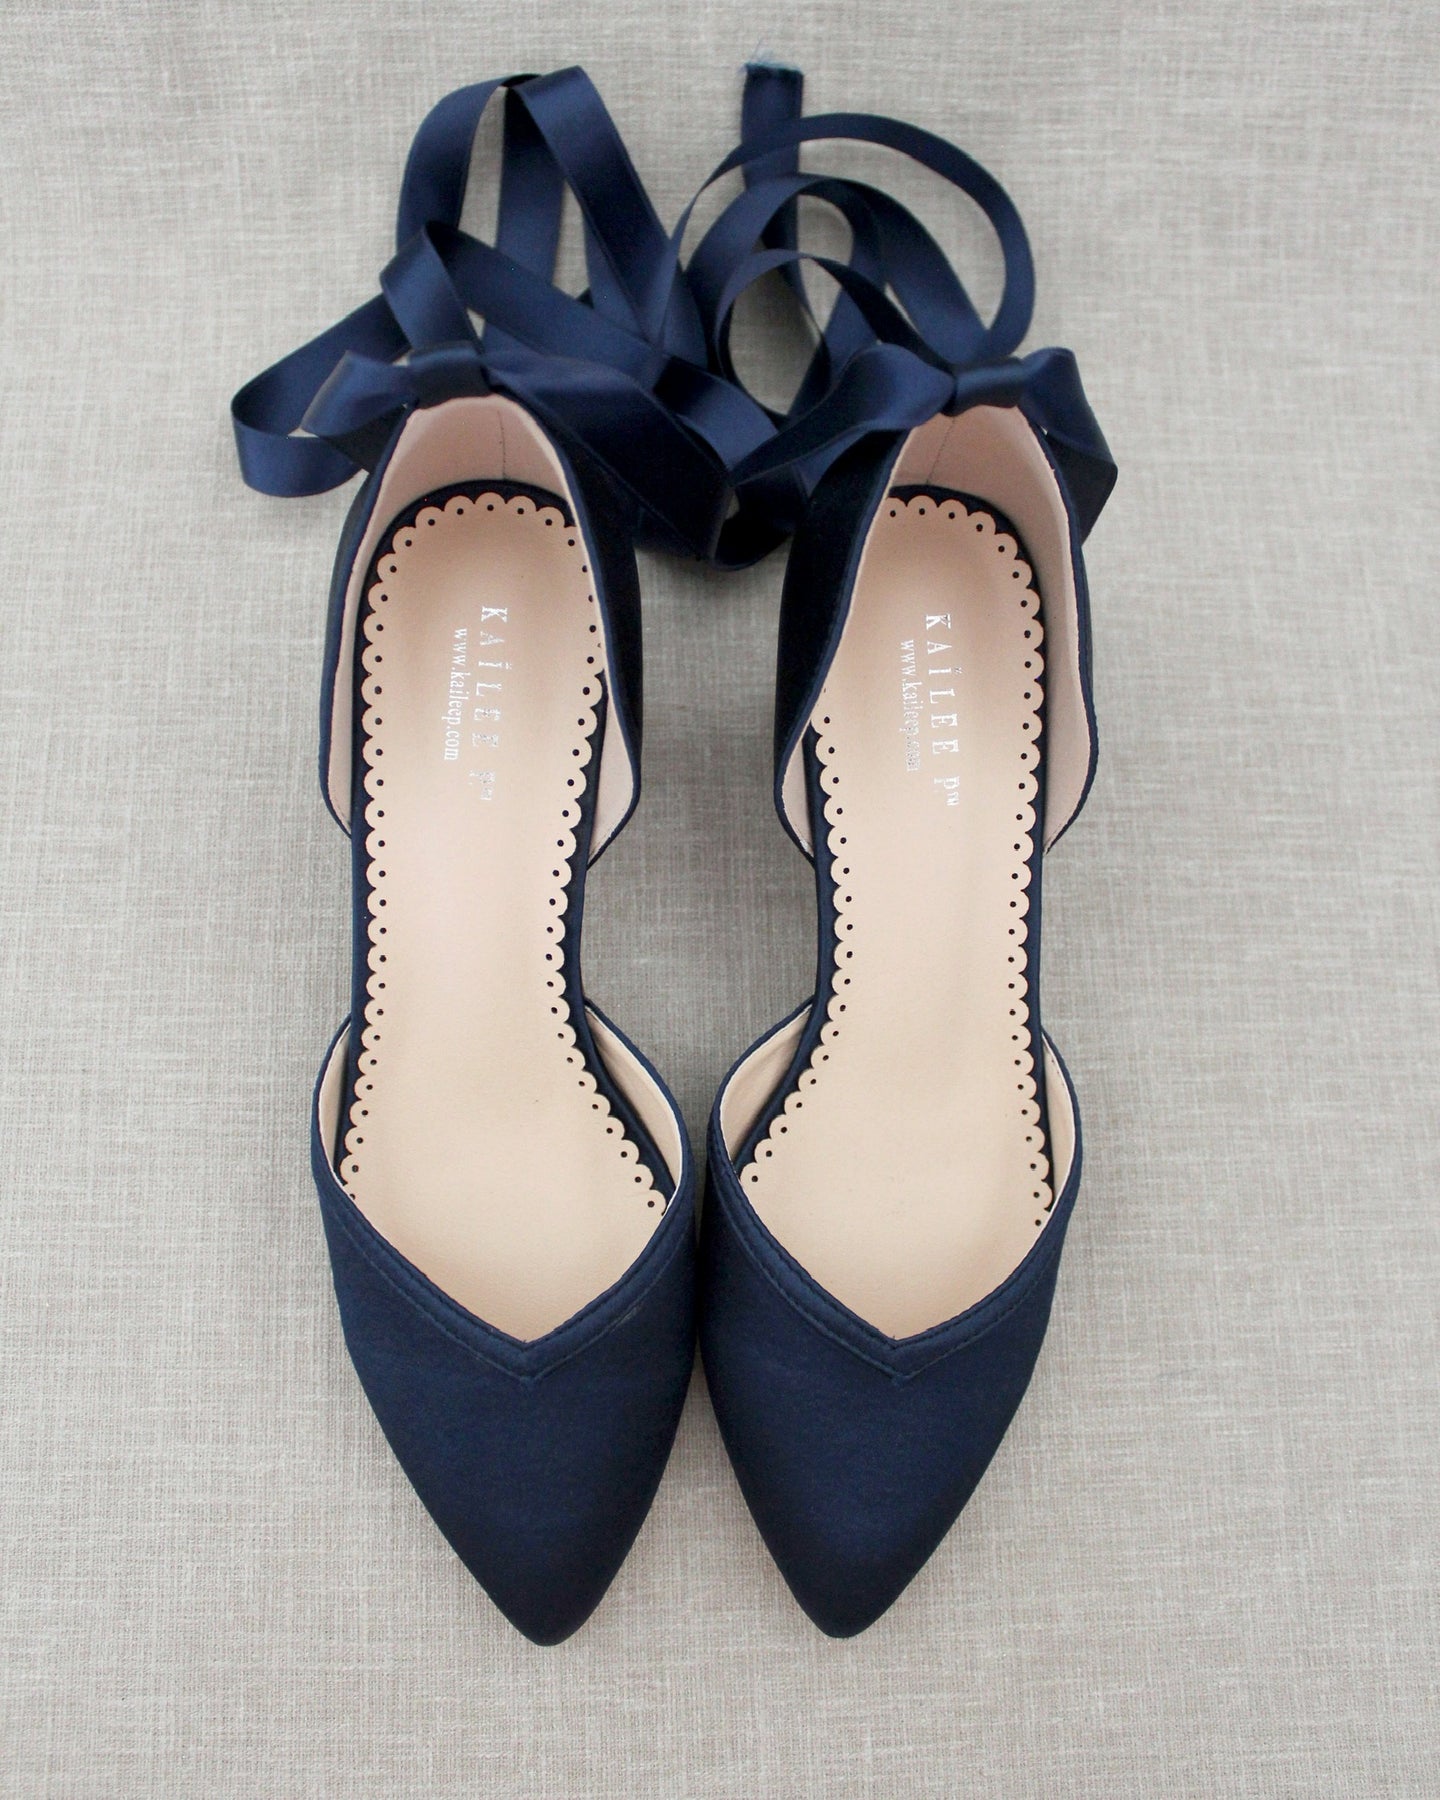 Satin Lace Up Evening Block Heels, Bridesmaids Shoes, Prom Shoes ...